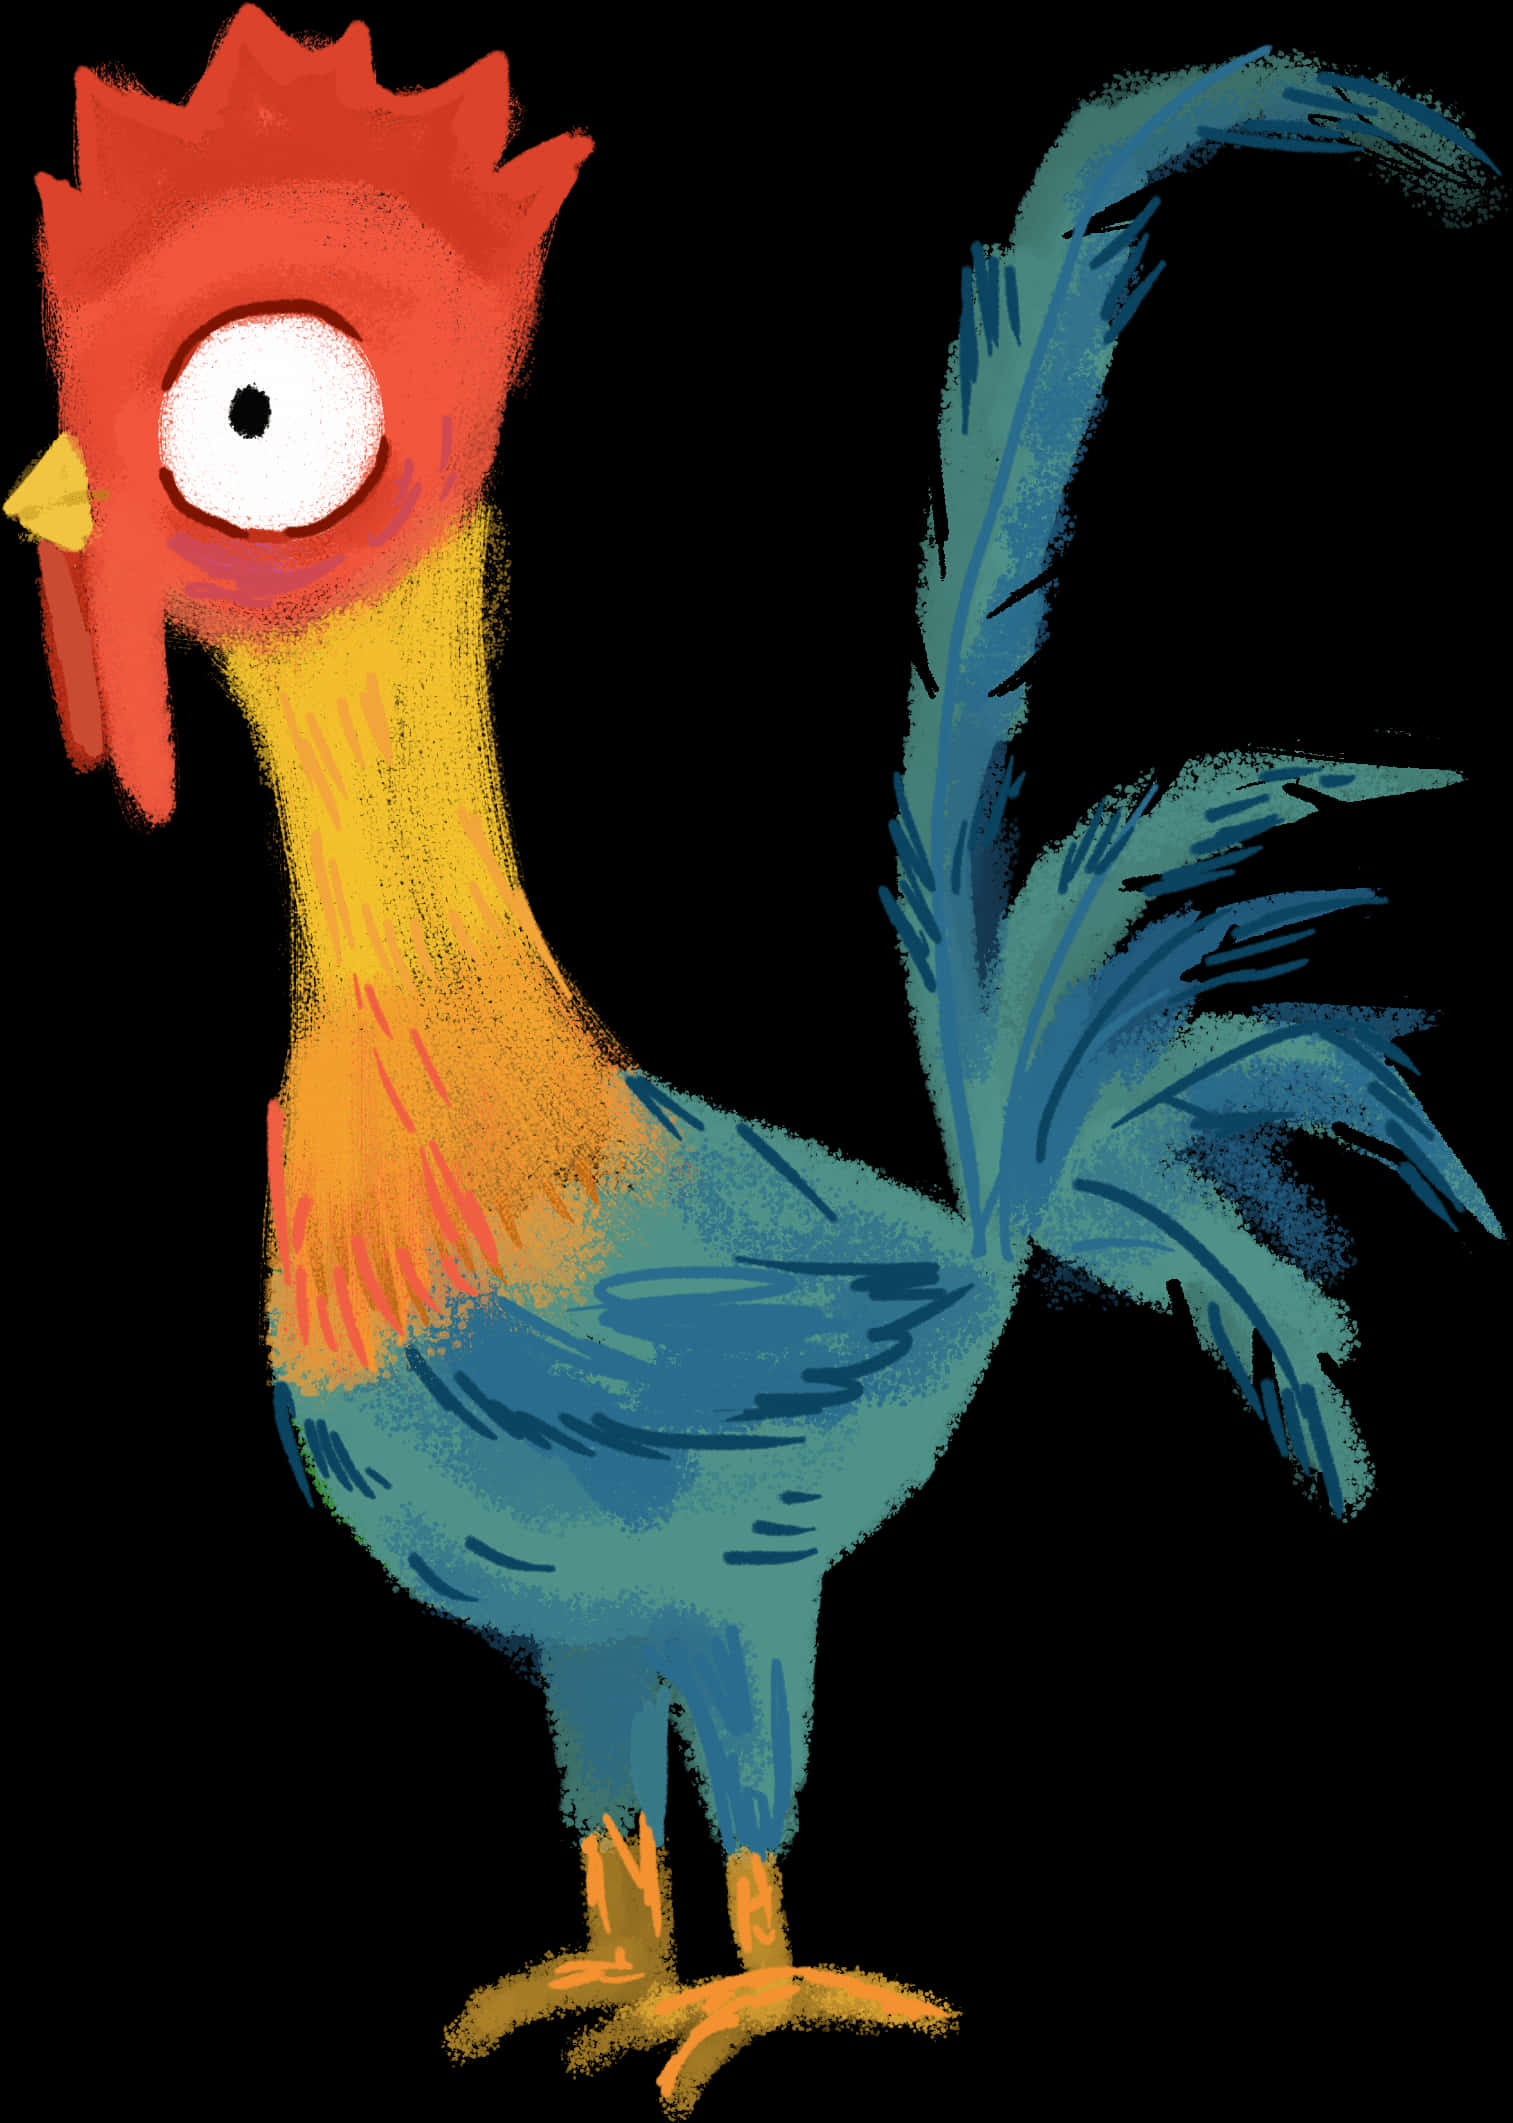 A Cartoon Rooster With A Black Background